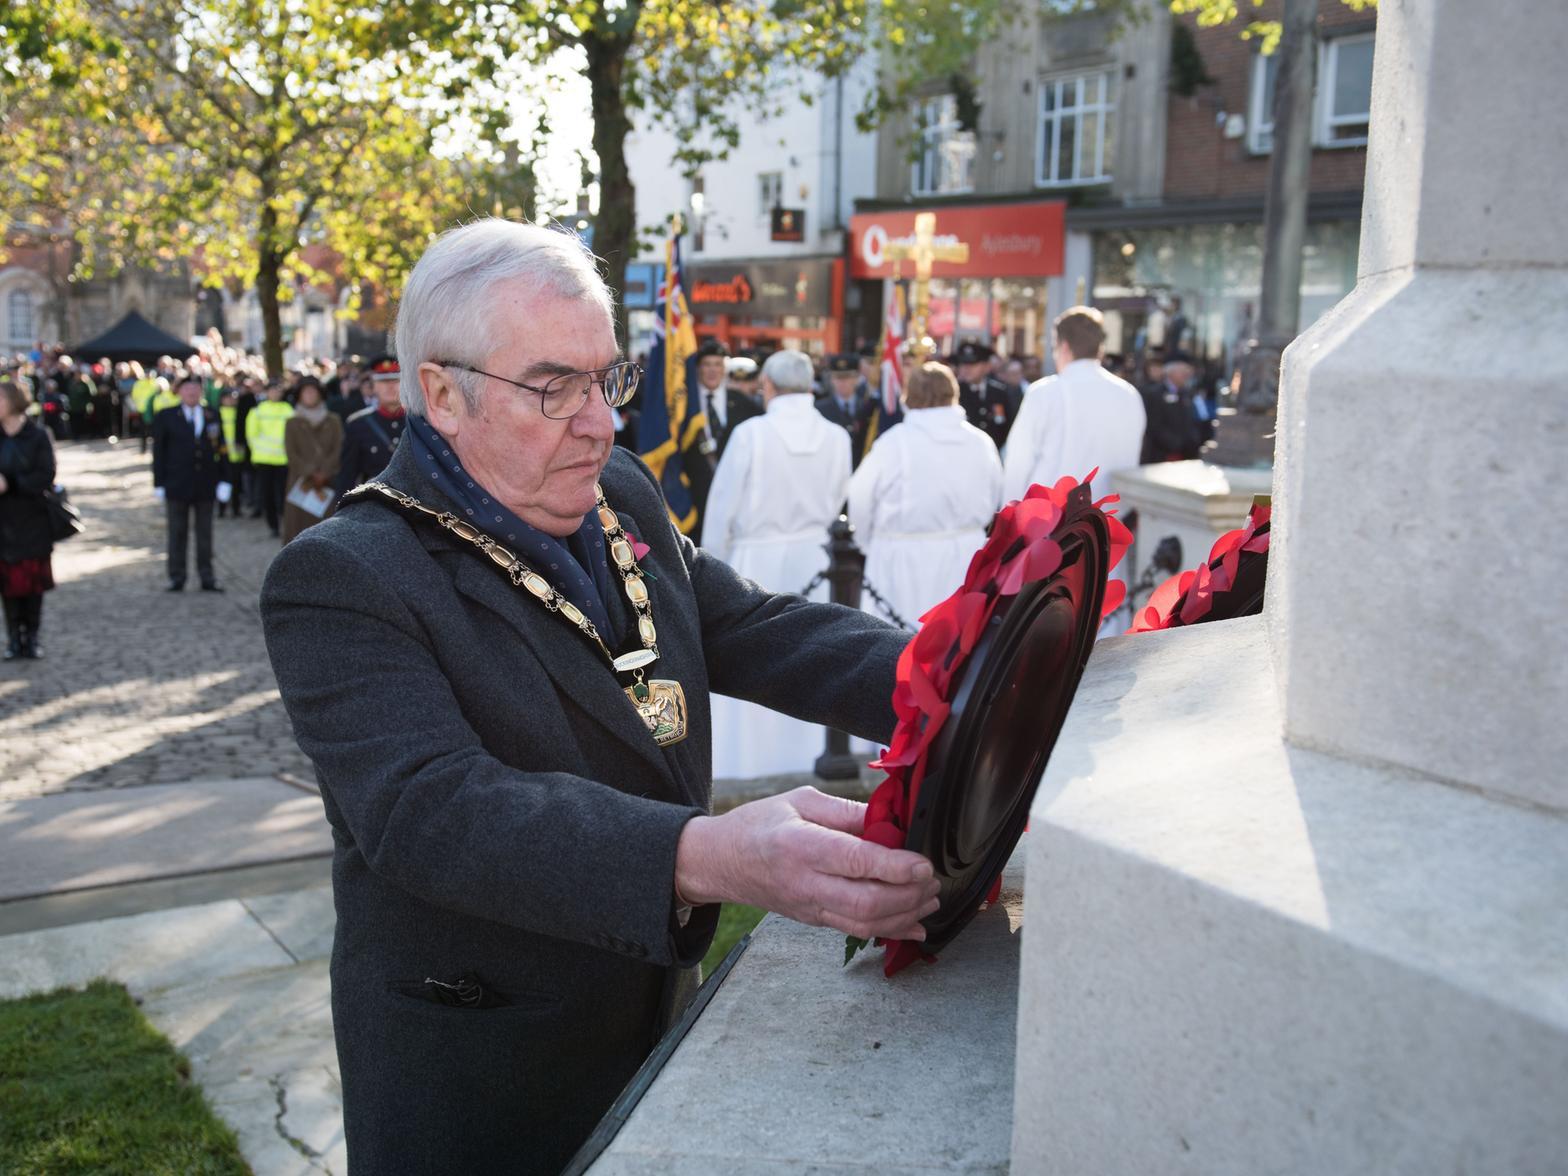 Hundreds of people turned out for the 100th Remembrance event. Those present included representatives from the armed forces, Scouts, Guides and cadets, emergency services and local dignitaries.